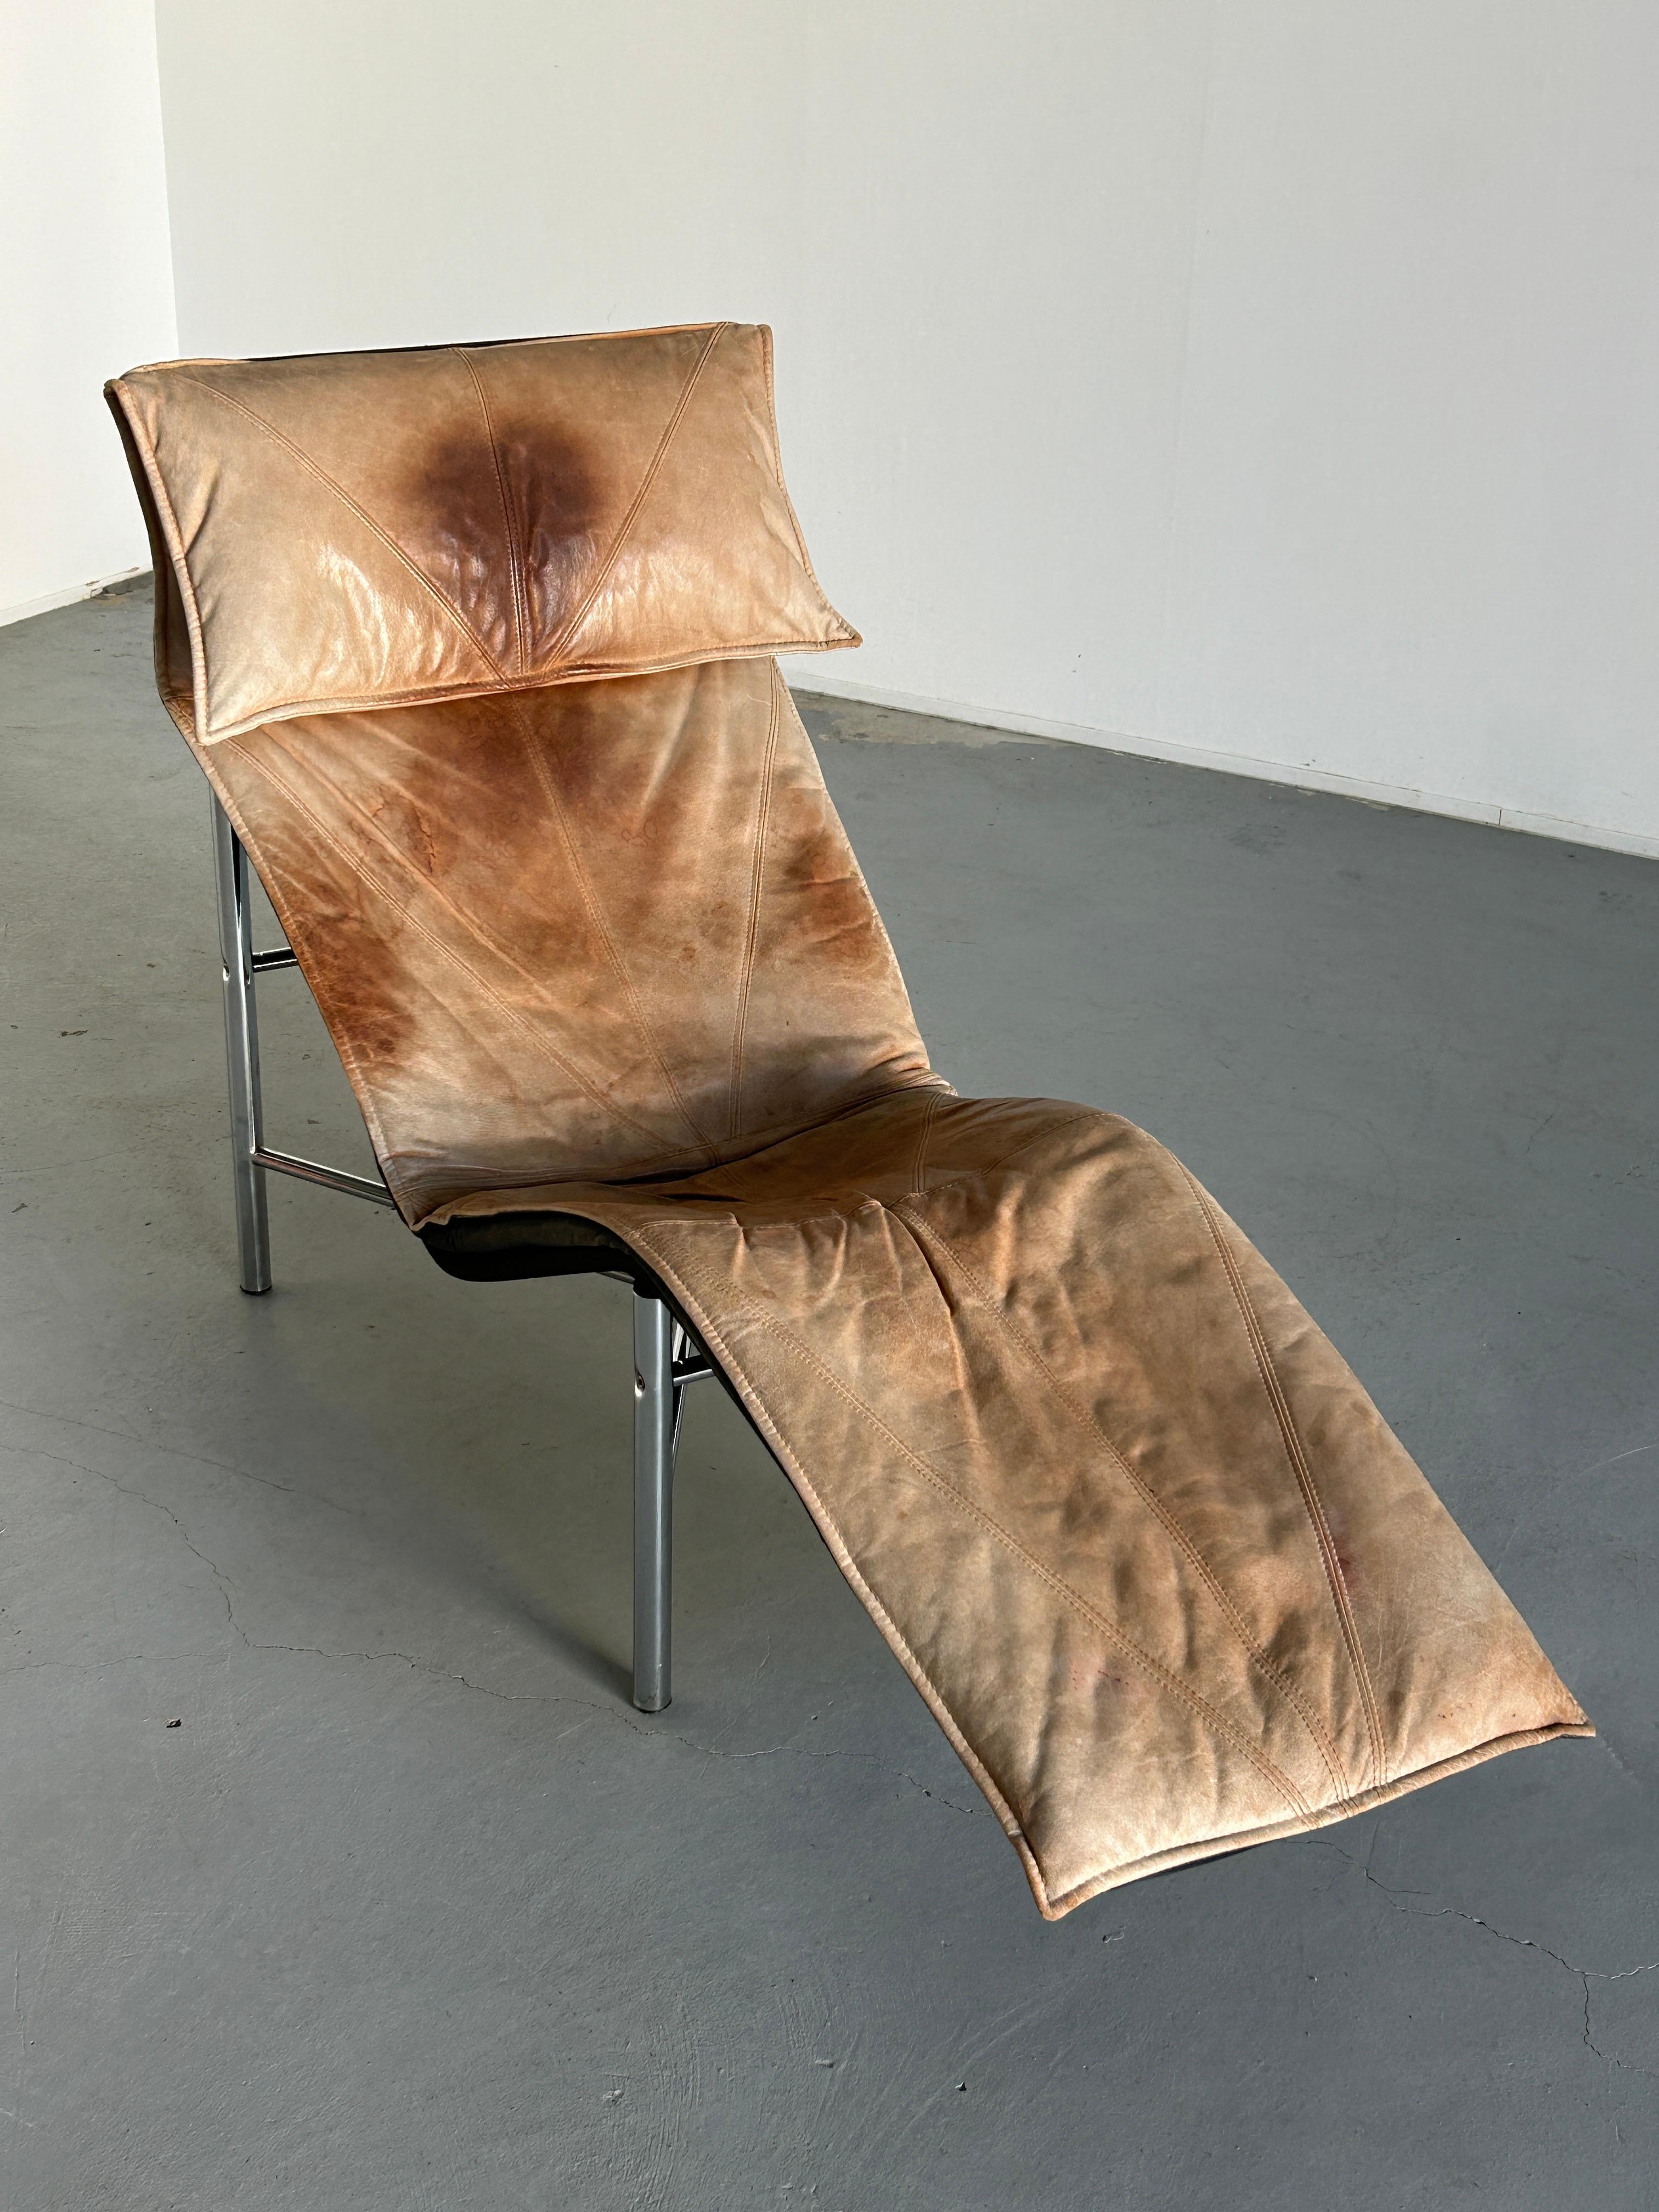 Late 20th Century Vintage Leather Chaise Longue in Cognac Leather by Tord Bjorklund for Ikea, 1980